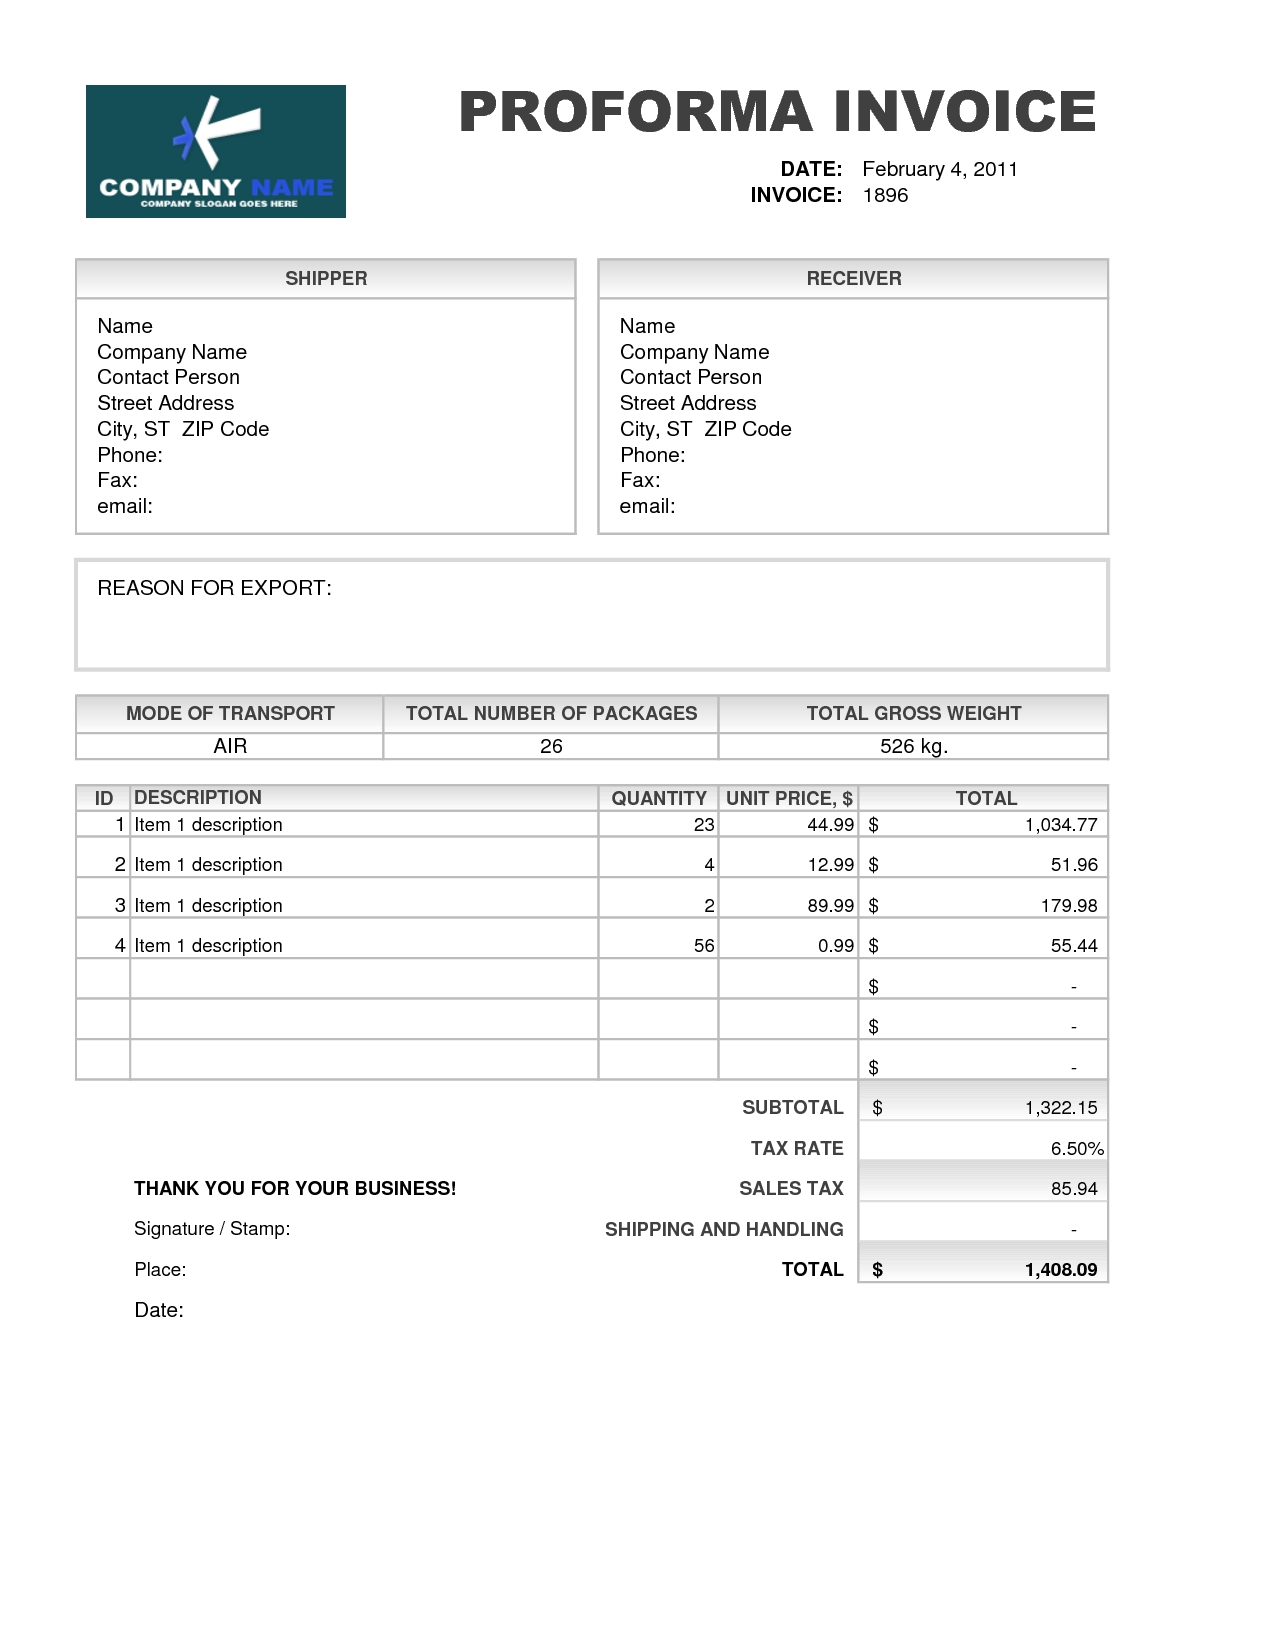 invoice format in excel excel invoice template excel service example proforma invoice